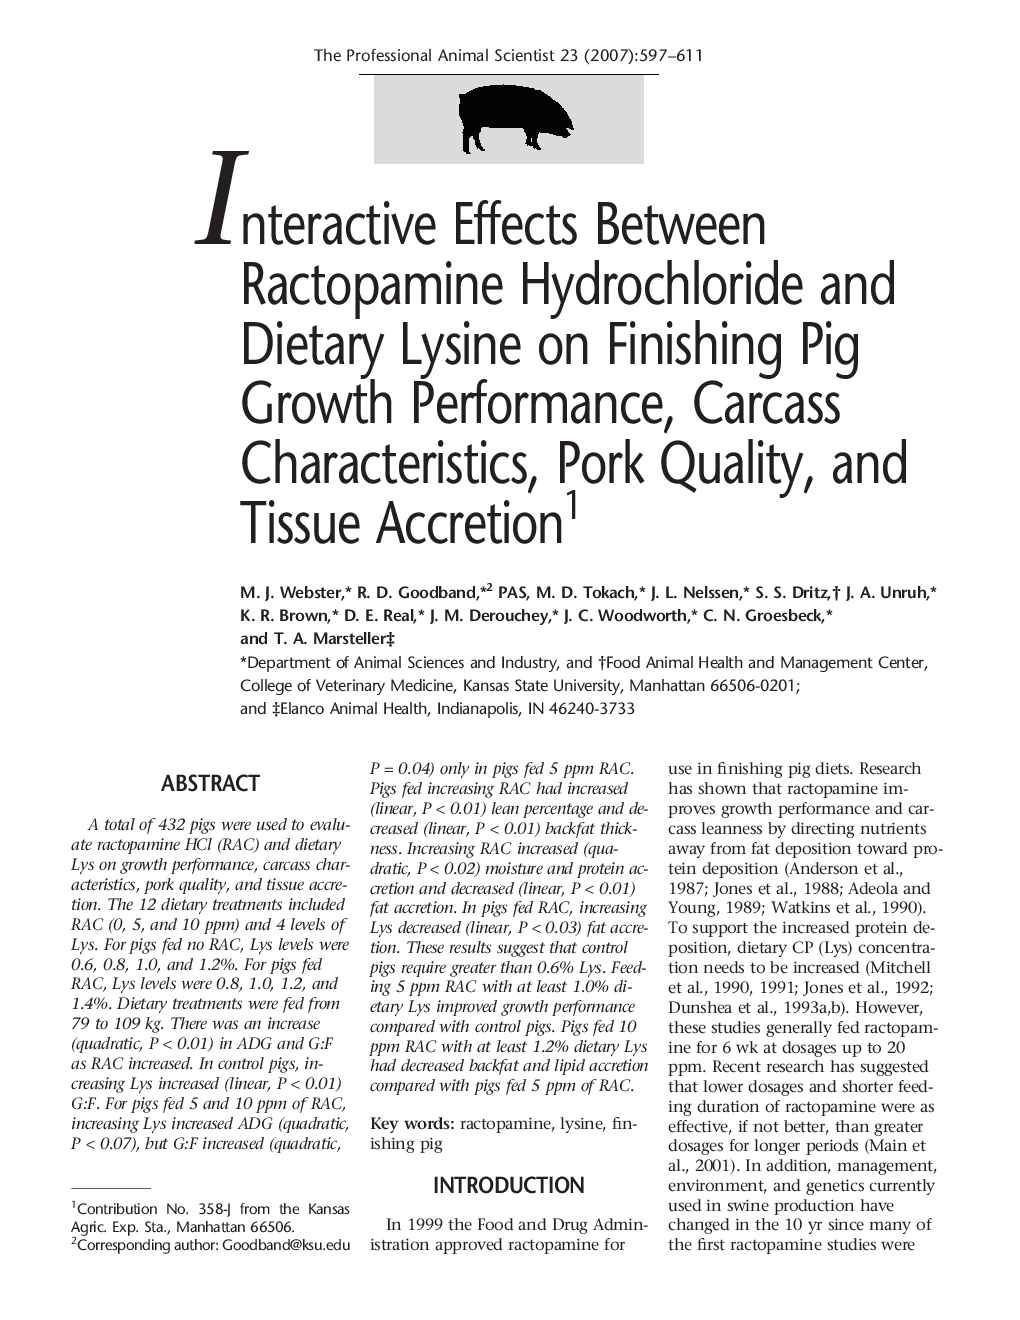 Interactive Effects Between Ractopamine Hydrochloride and Dietary Lysine on Finishing Pig Growth Performance, Carcass Characteristics, Pork Quality, and Tissue Accretion1